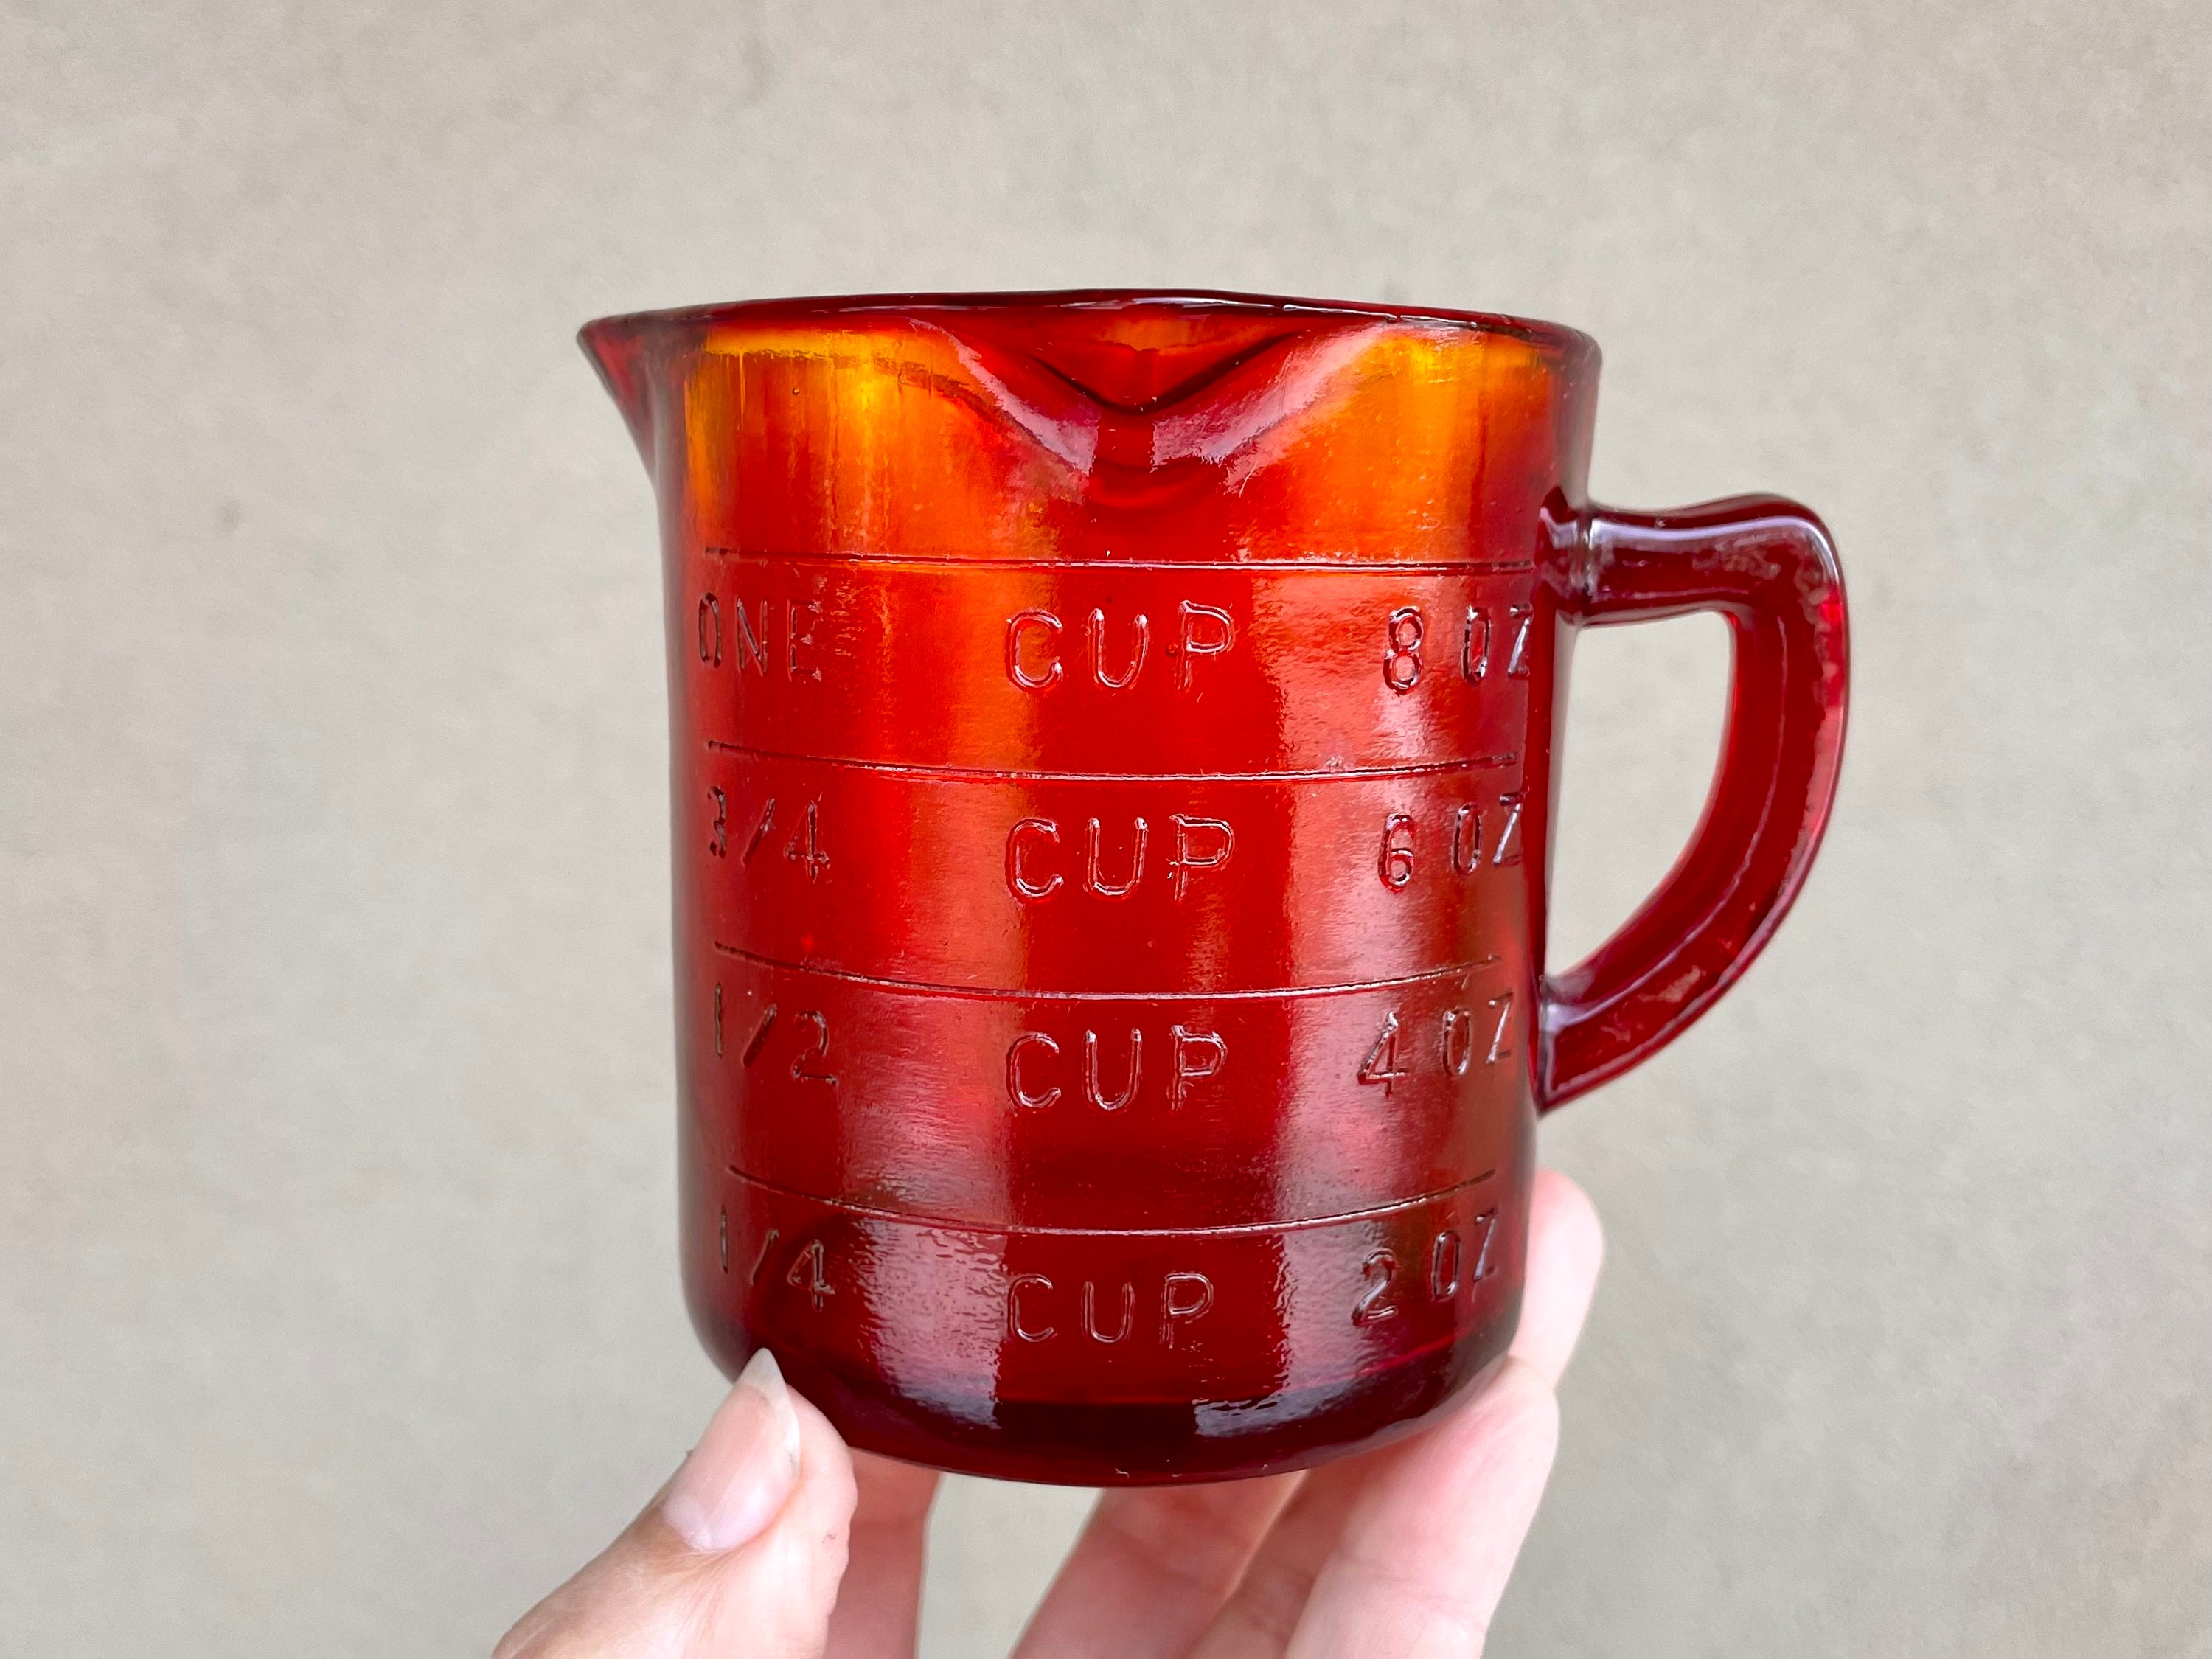 Depression Glass Measuring Cups